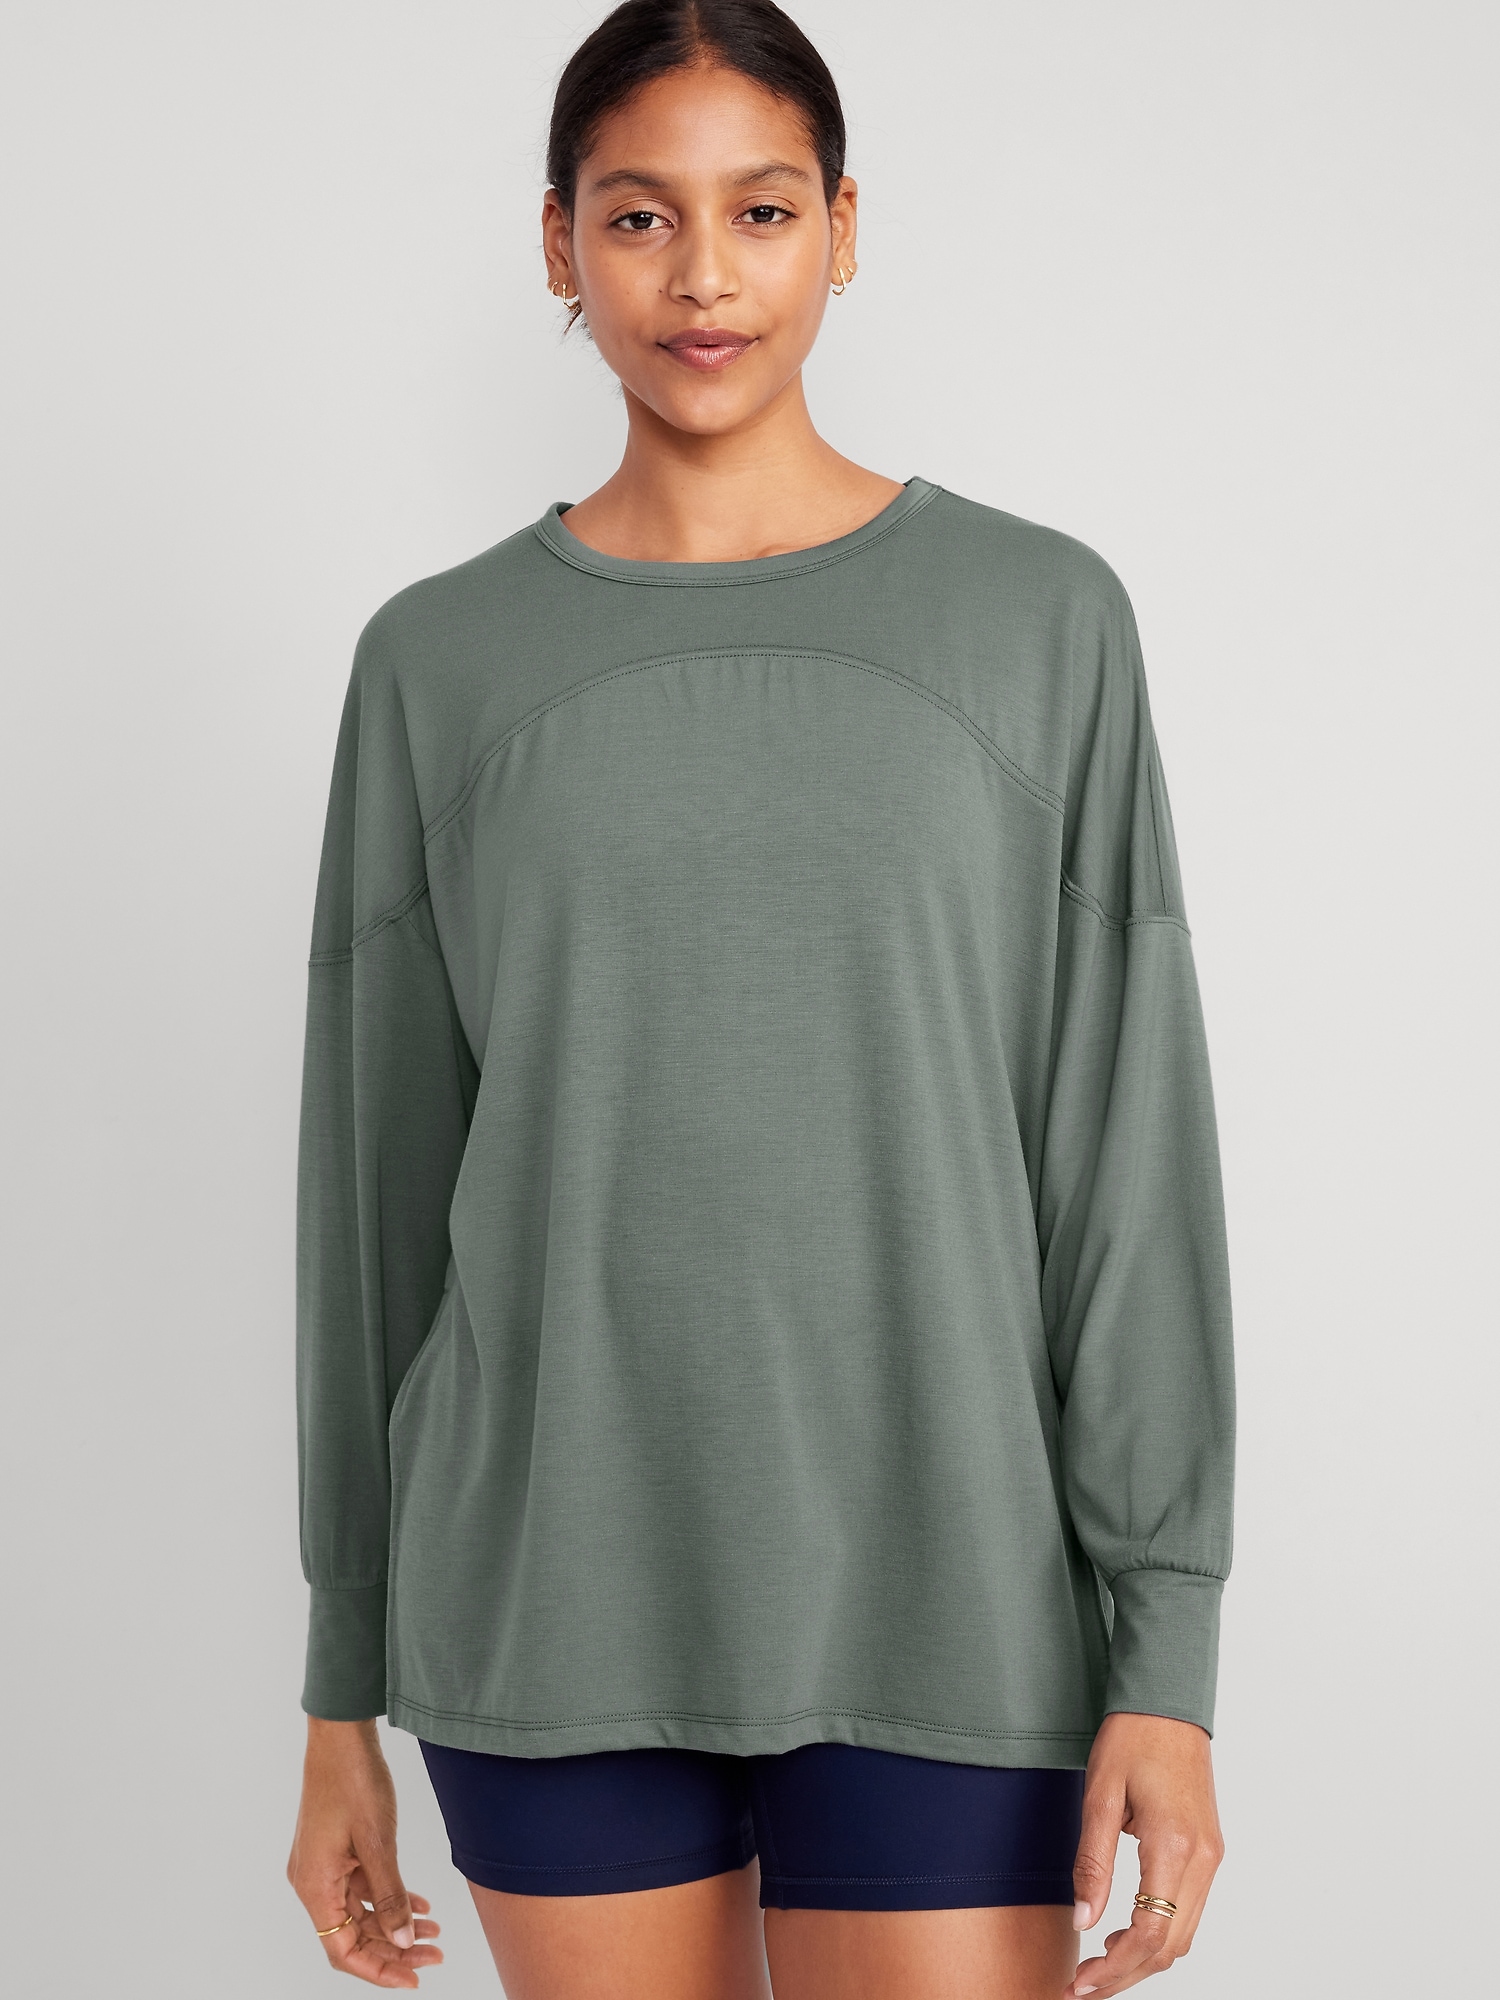 Old Navy Oversized UltraLite All-Day Tunic for Women green. 1